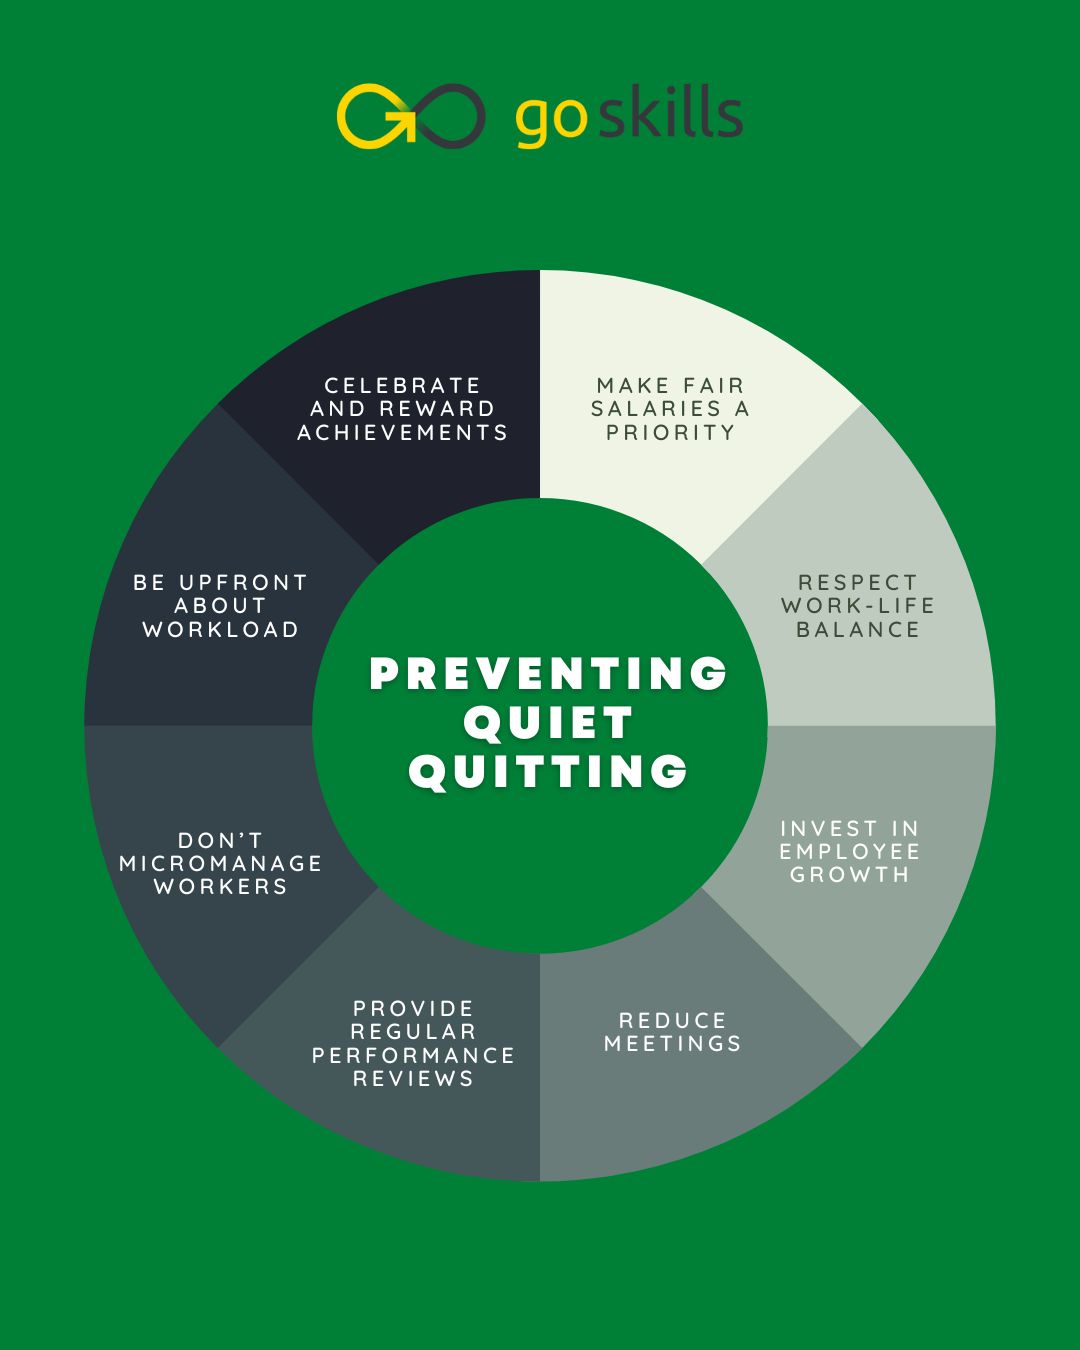 Chart: 'Quiet Quitting' Is All the Rage - Or Is It?